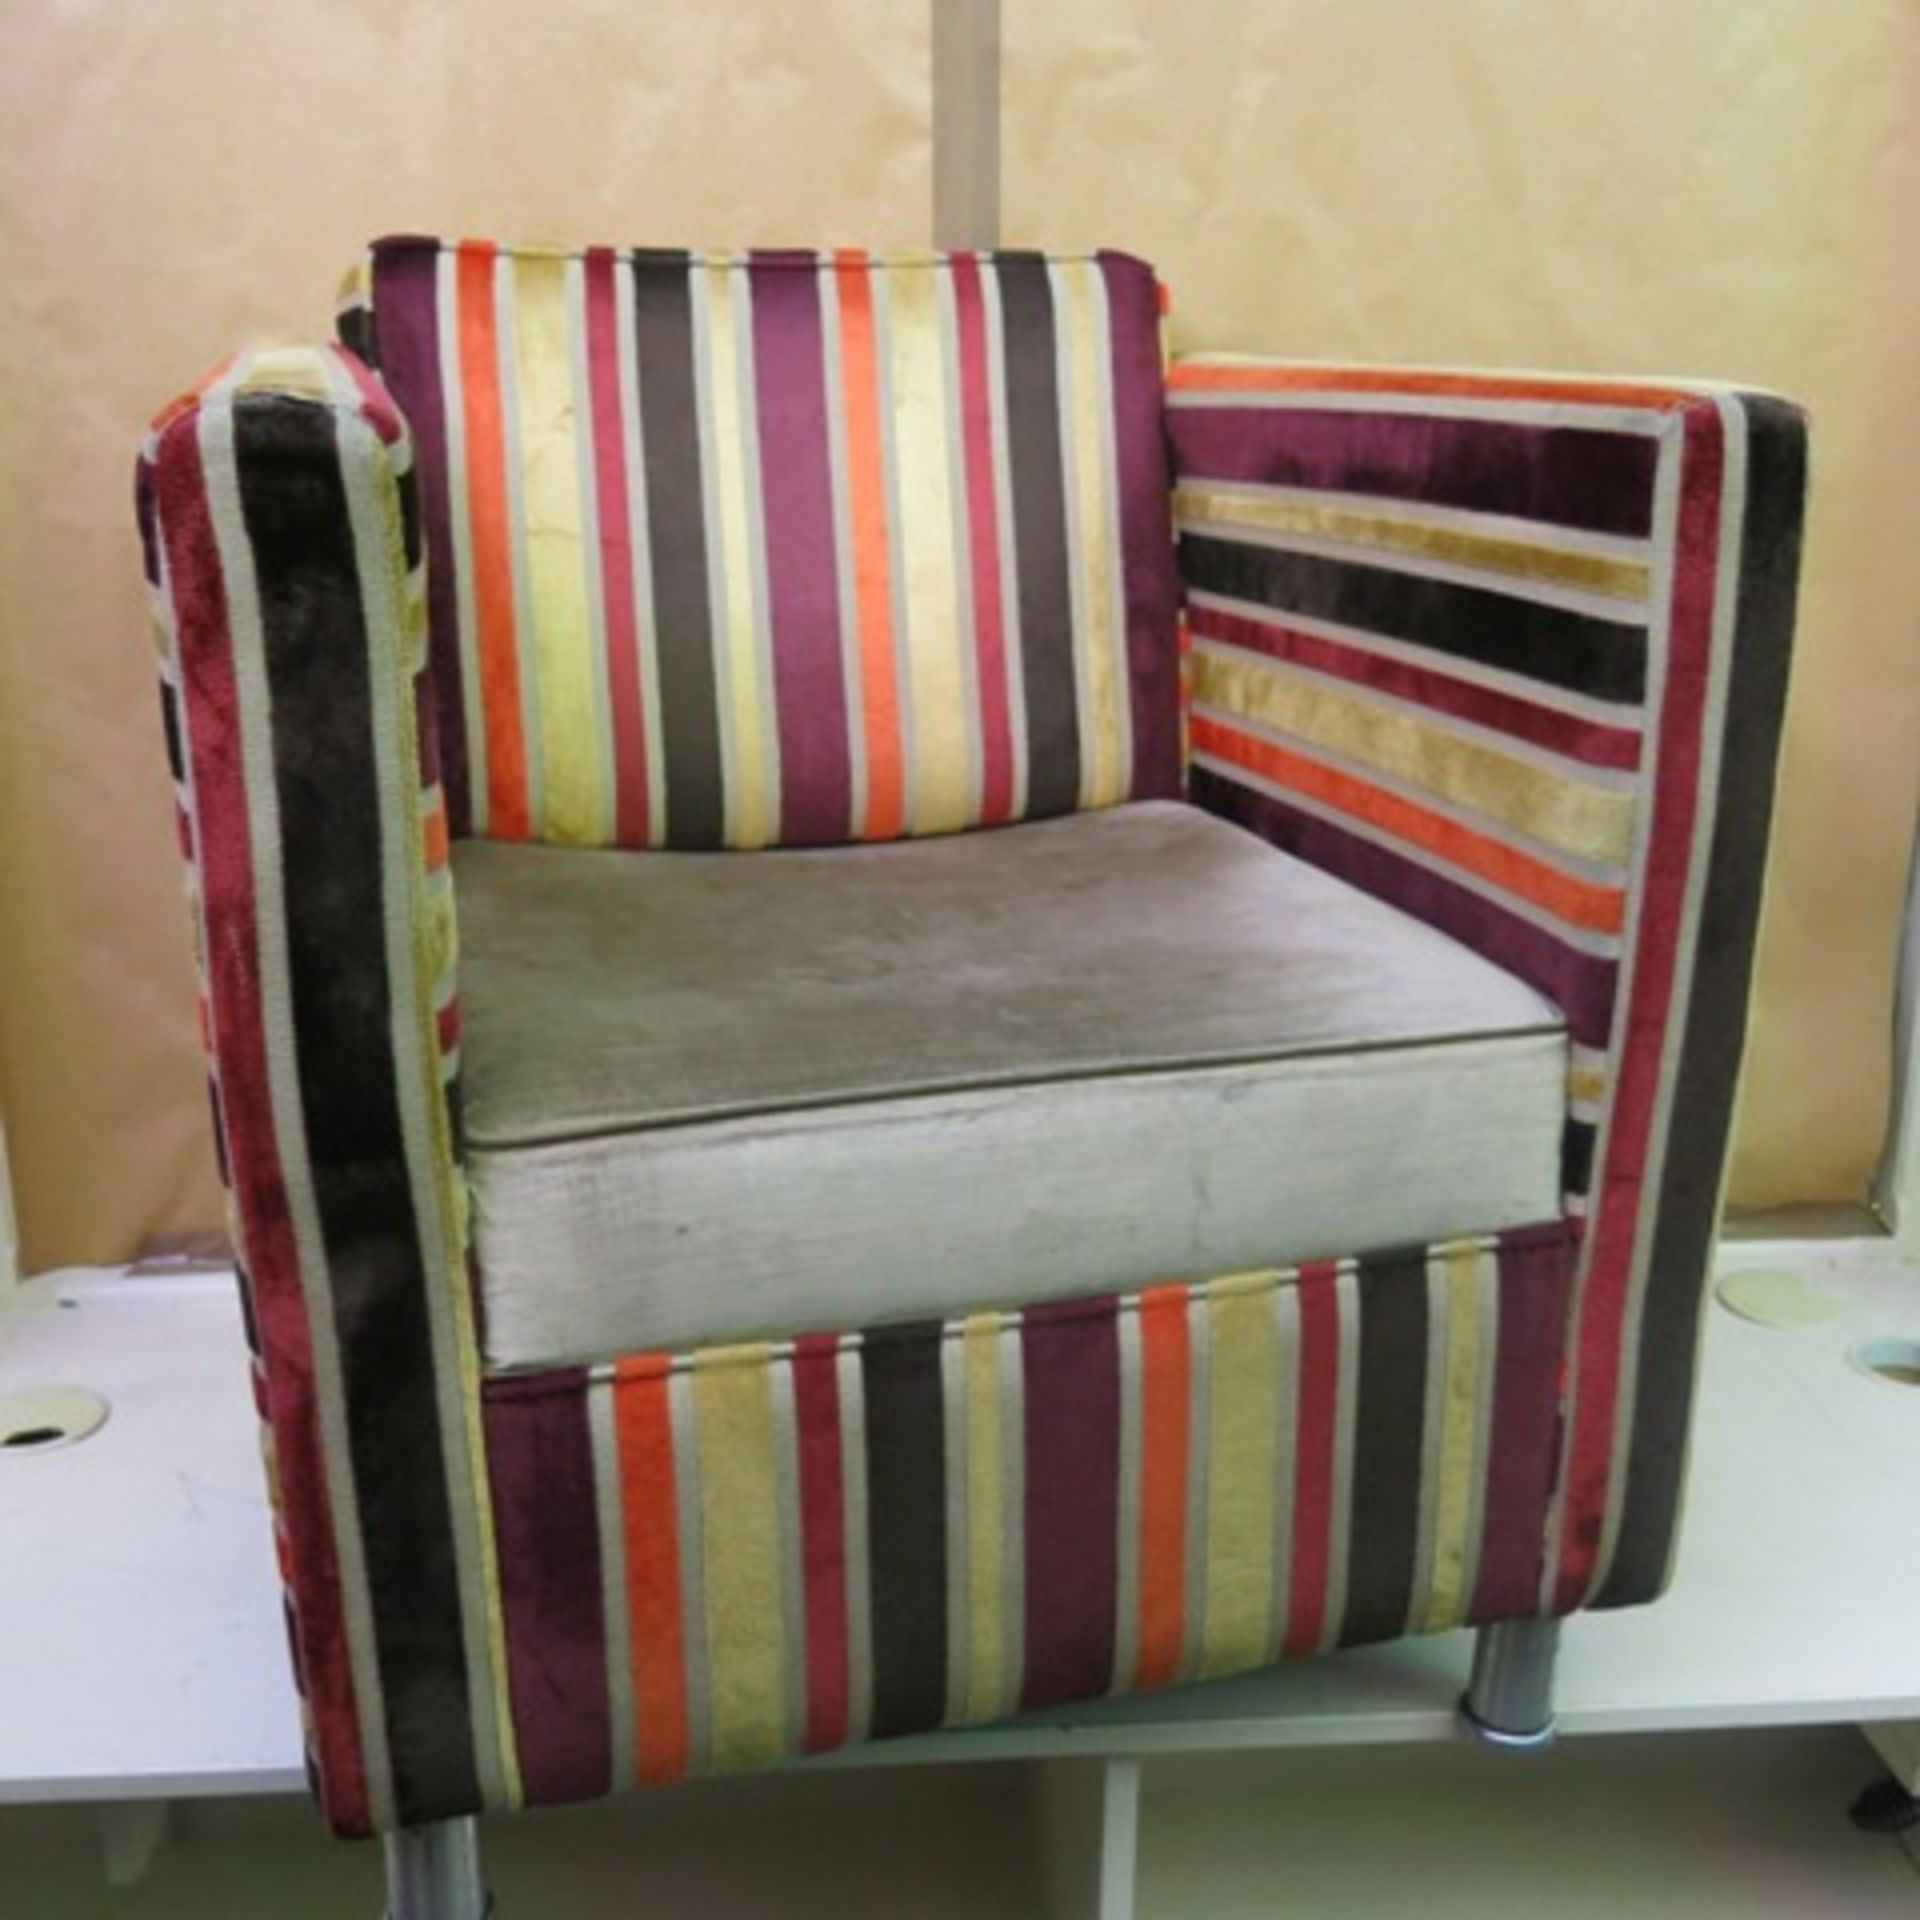 2 x Armchairs Upholstered in Multi-coloured Fabric on Metal Legs - Image 7 of 10